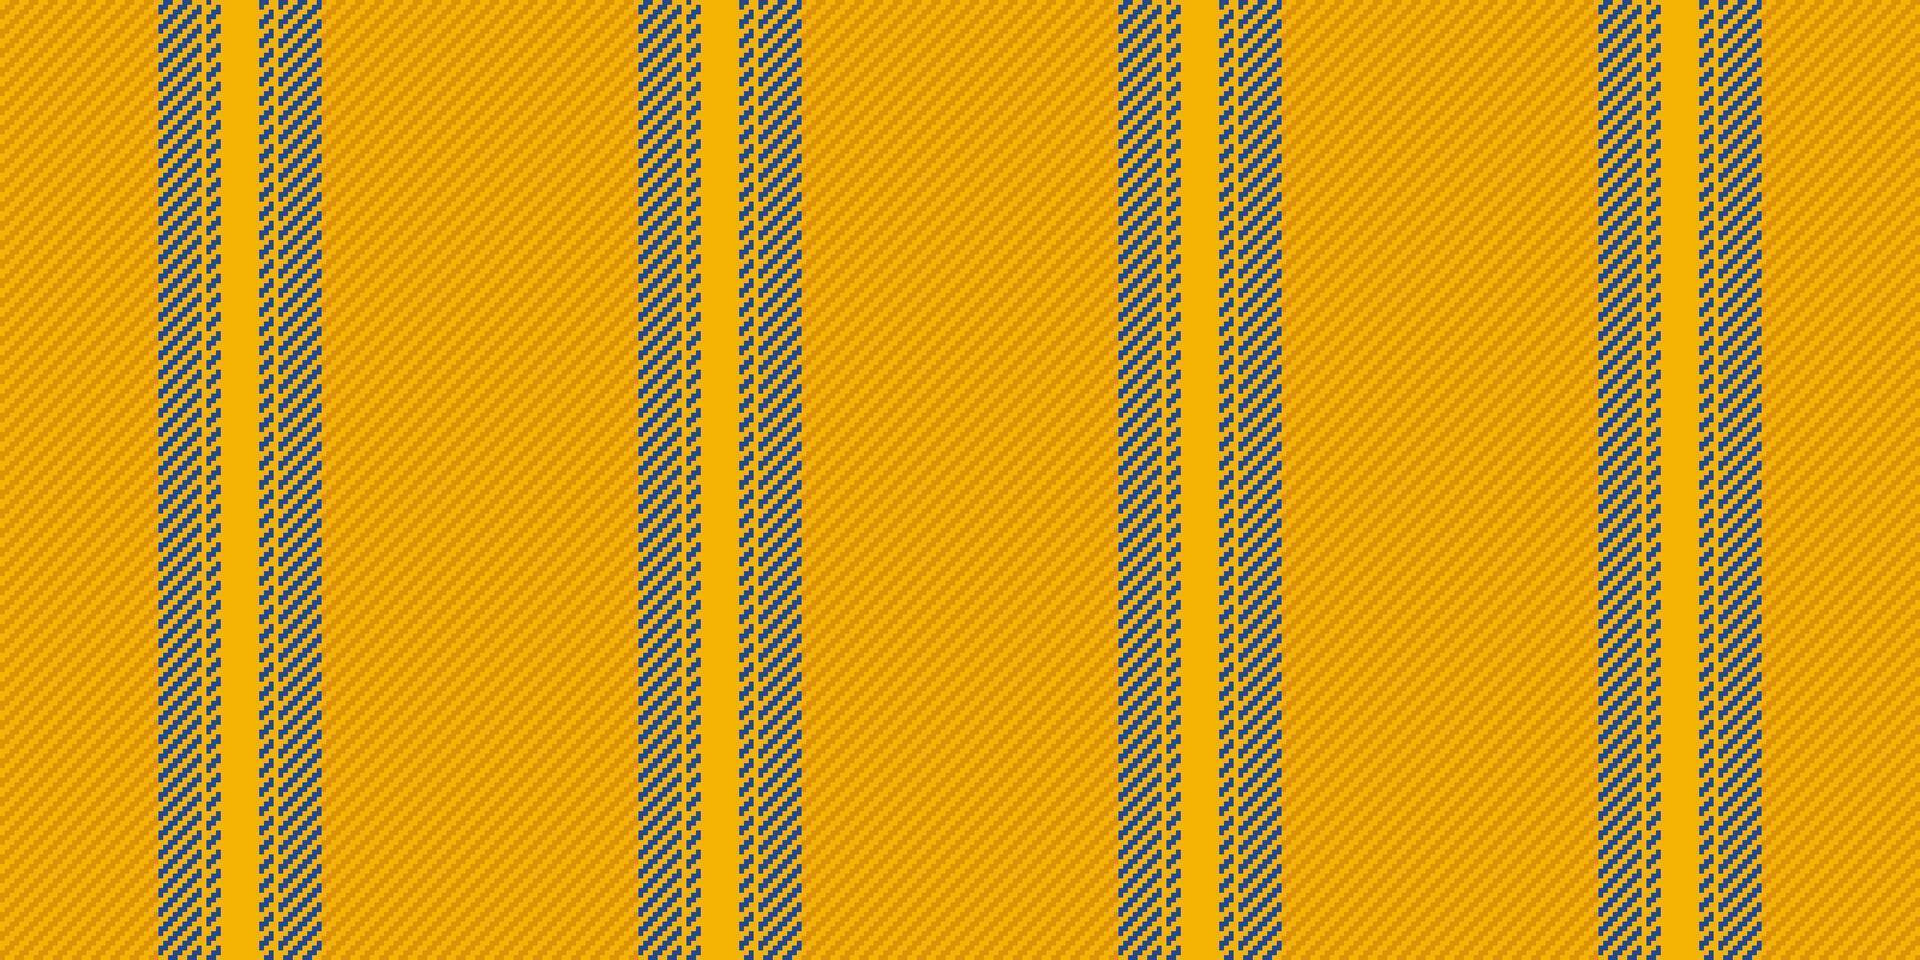 Internet fabric textile background, ornament pattern lines seamless. Clothes stripe vertical vector texture in bright and amber colors.